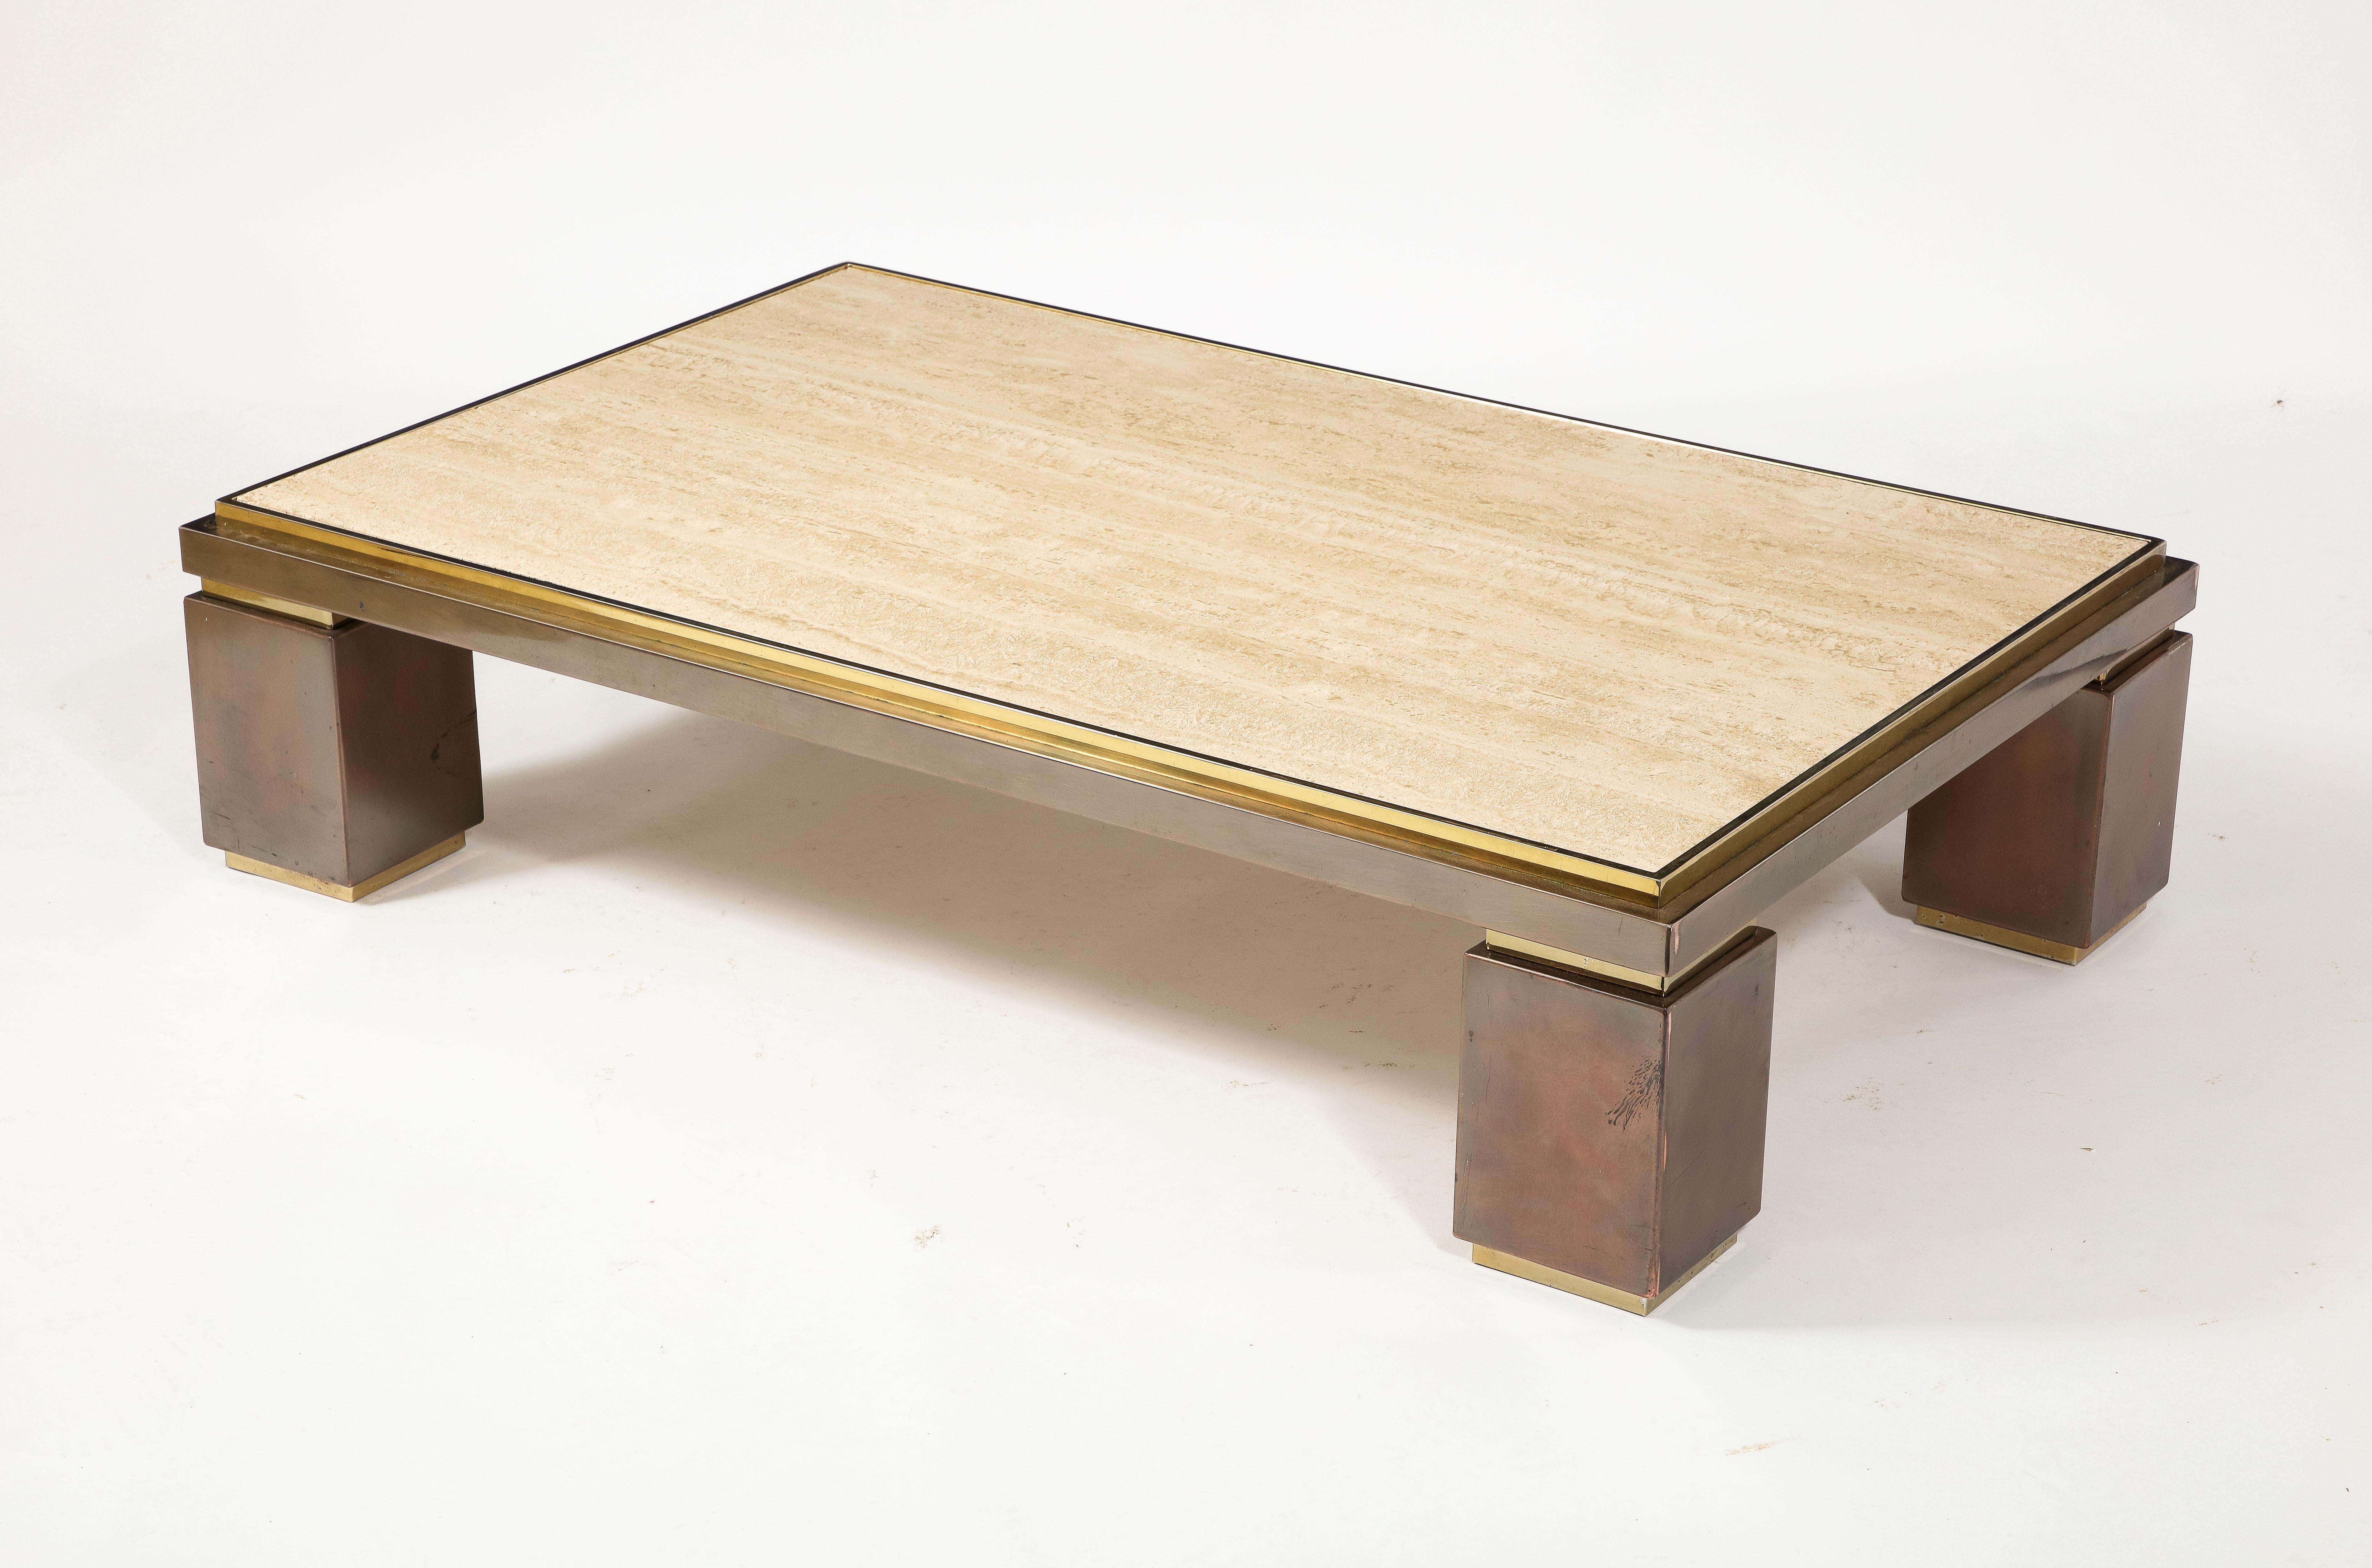 Large Deco Style BelgoChrom Travertine & Brass Coffee Table, Belgium 1960's For Sale 7